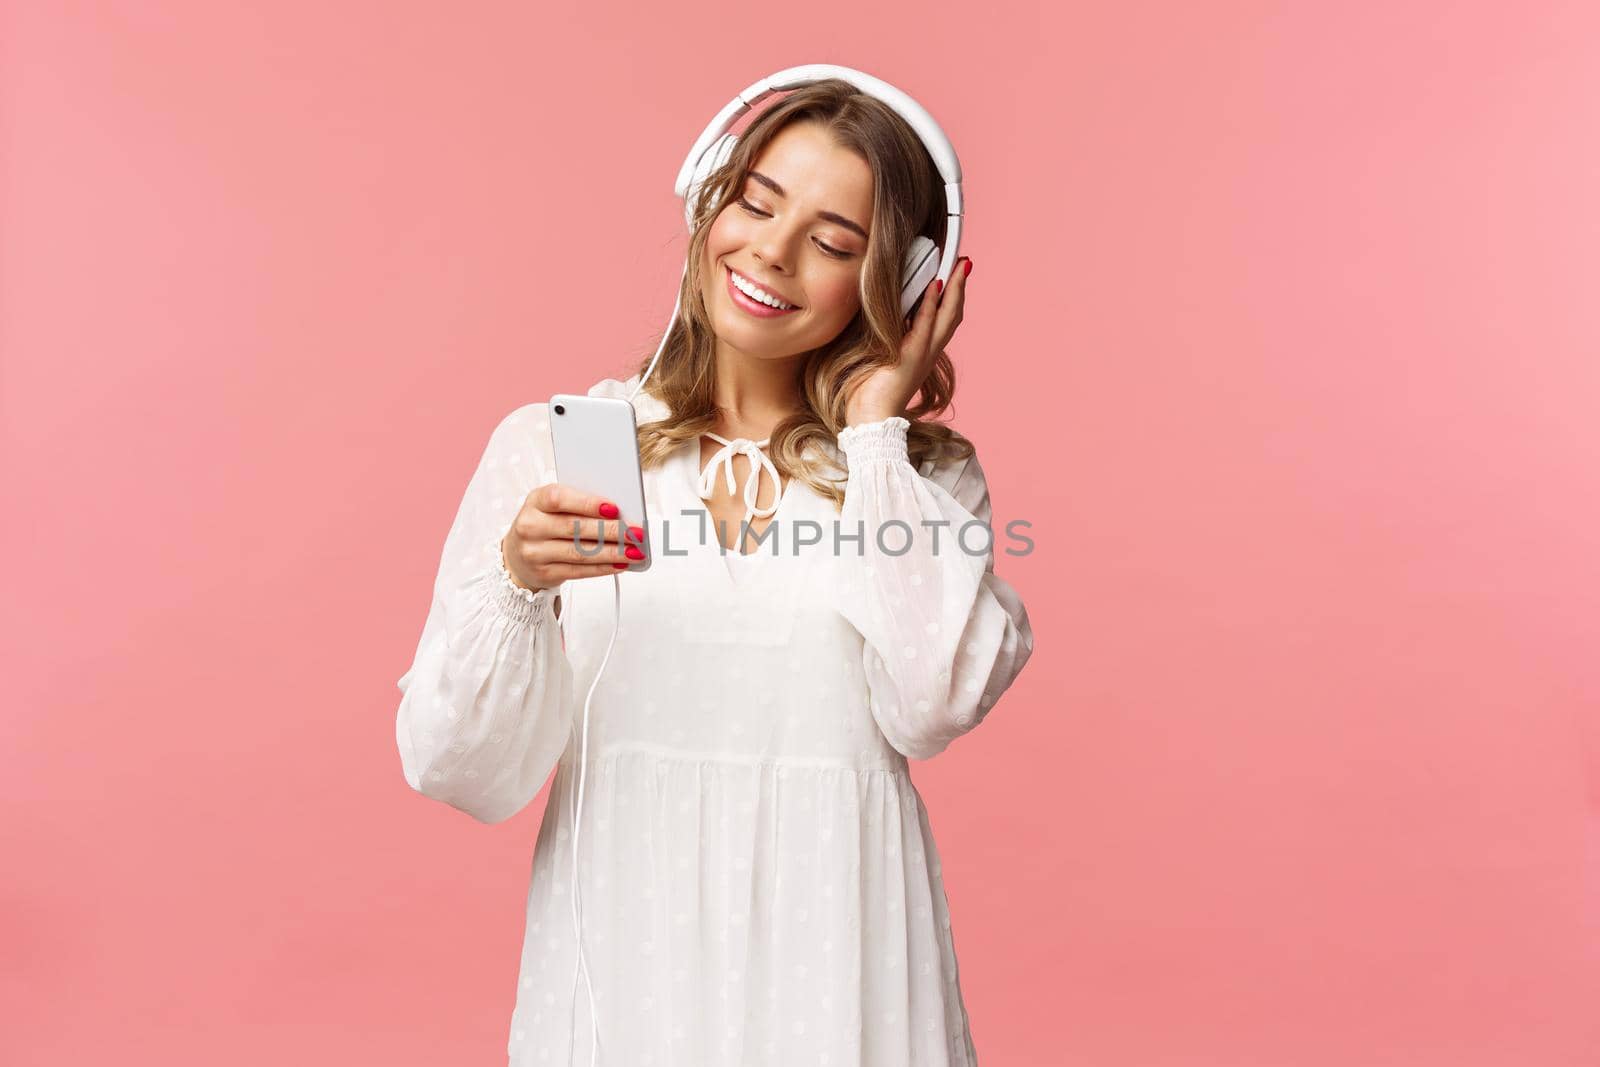 Portrait of dreamy cute and tender blond girl in white dress, holding smartphone, listen music in headphones, smiling at display mobile phone as picking playlist for spring mood, pink background.